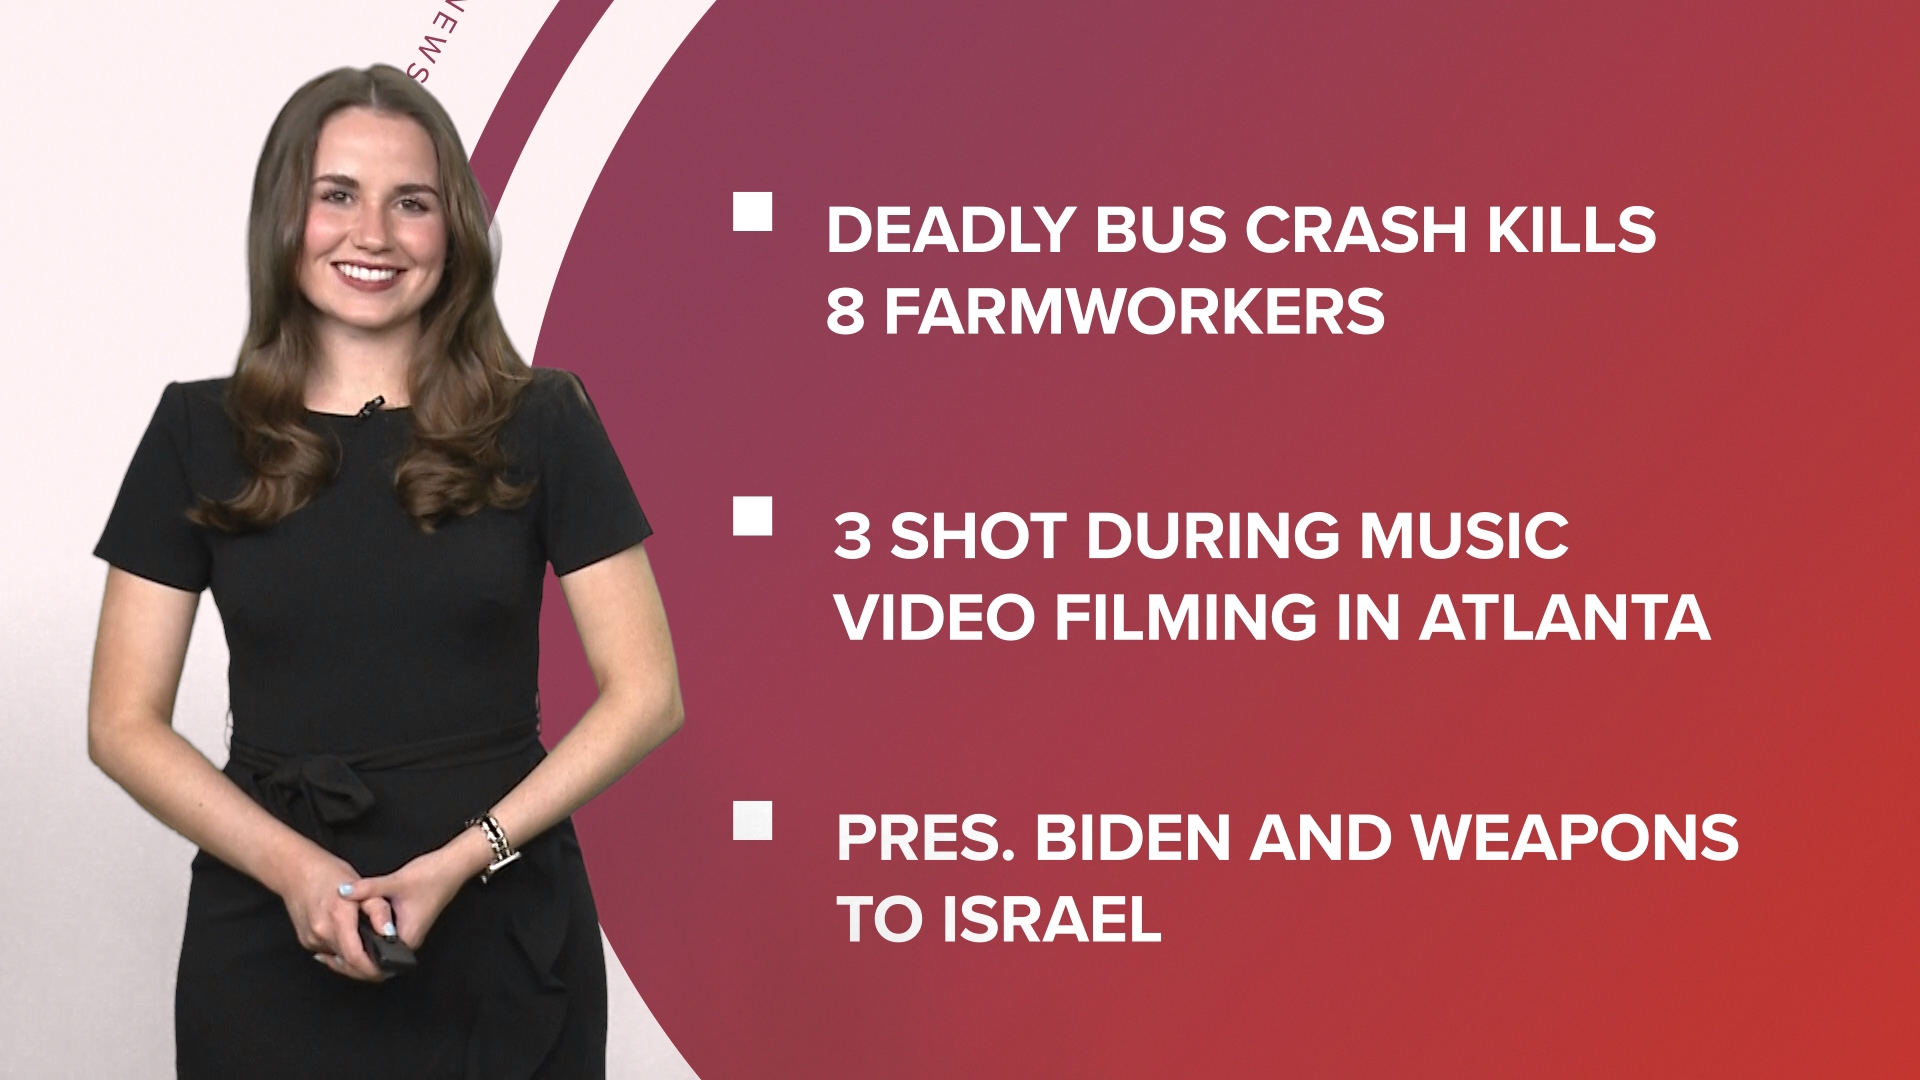 A look at what is happening in the news from 8 farmworkers killed in a bus crash to the Justice Department may prosecute Boeing and miniature poodle wins dog show.